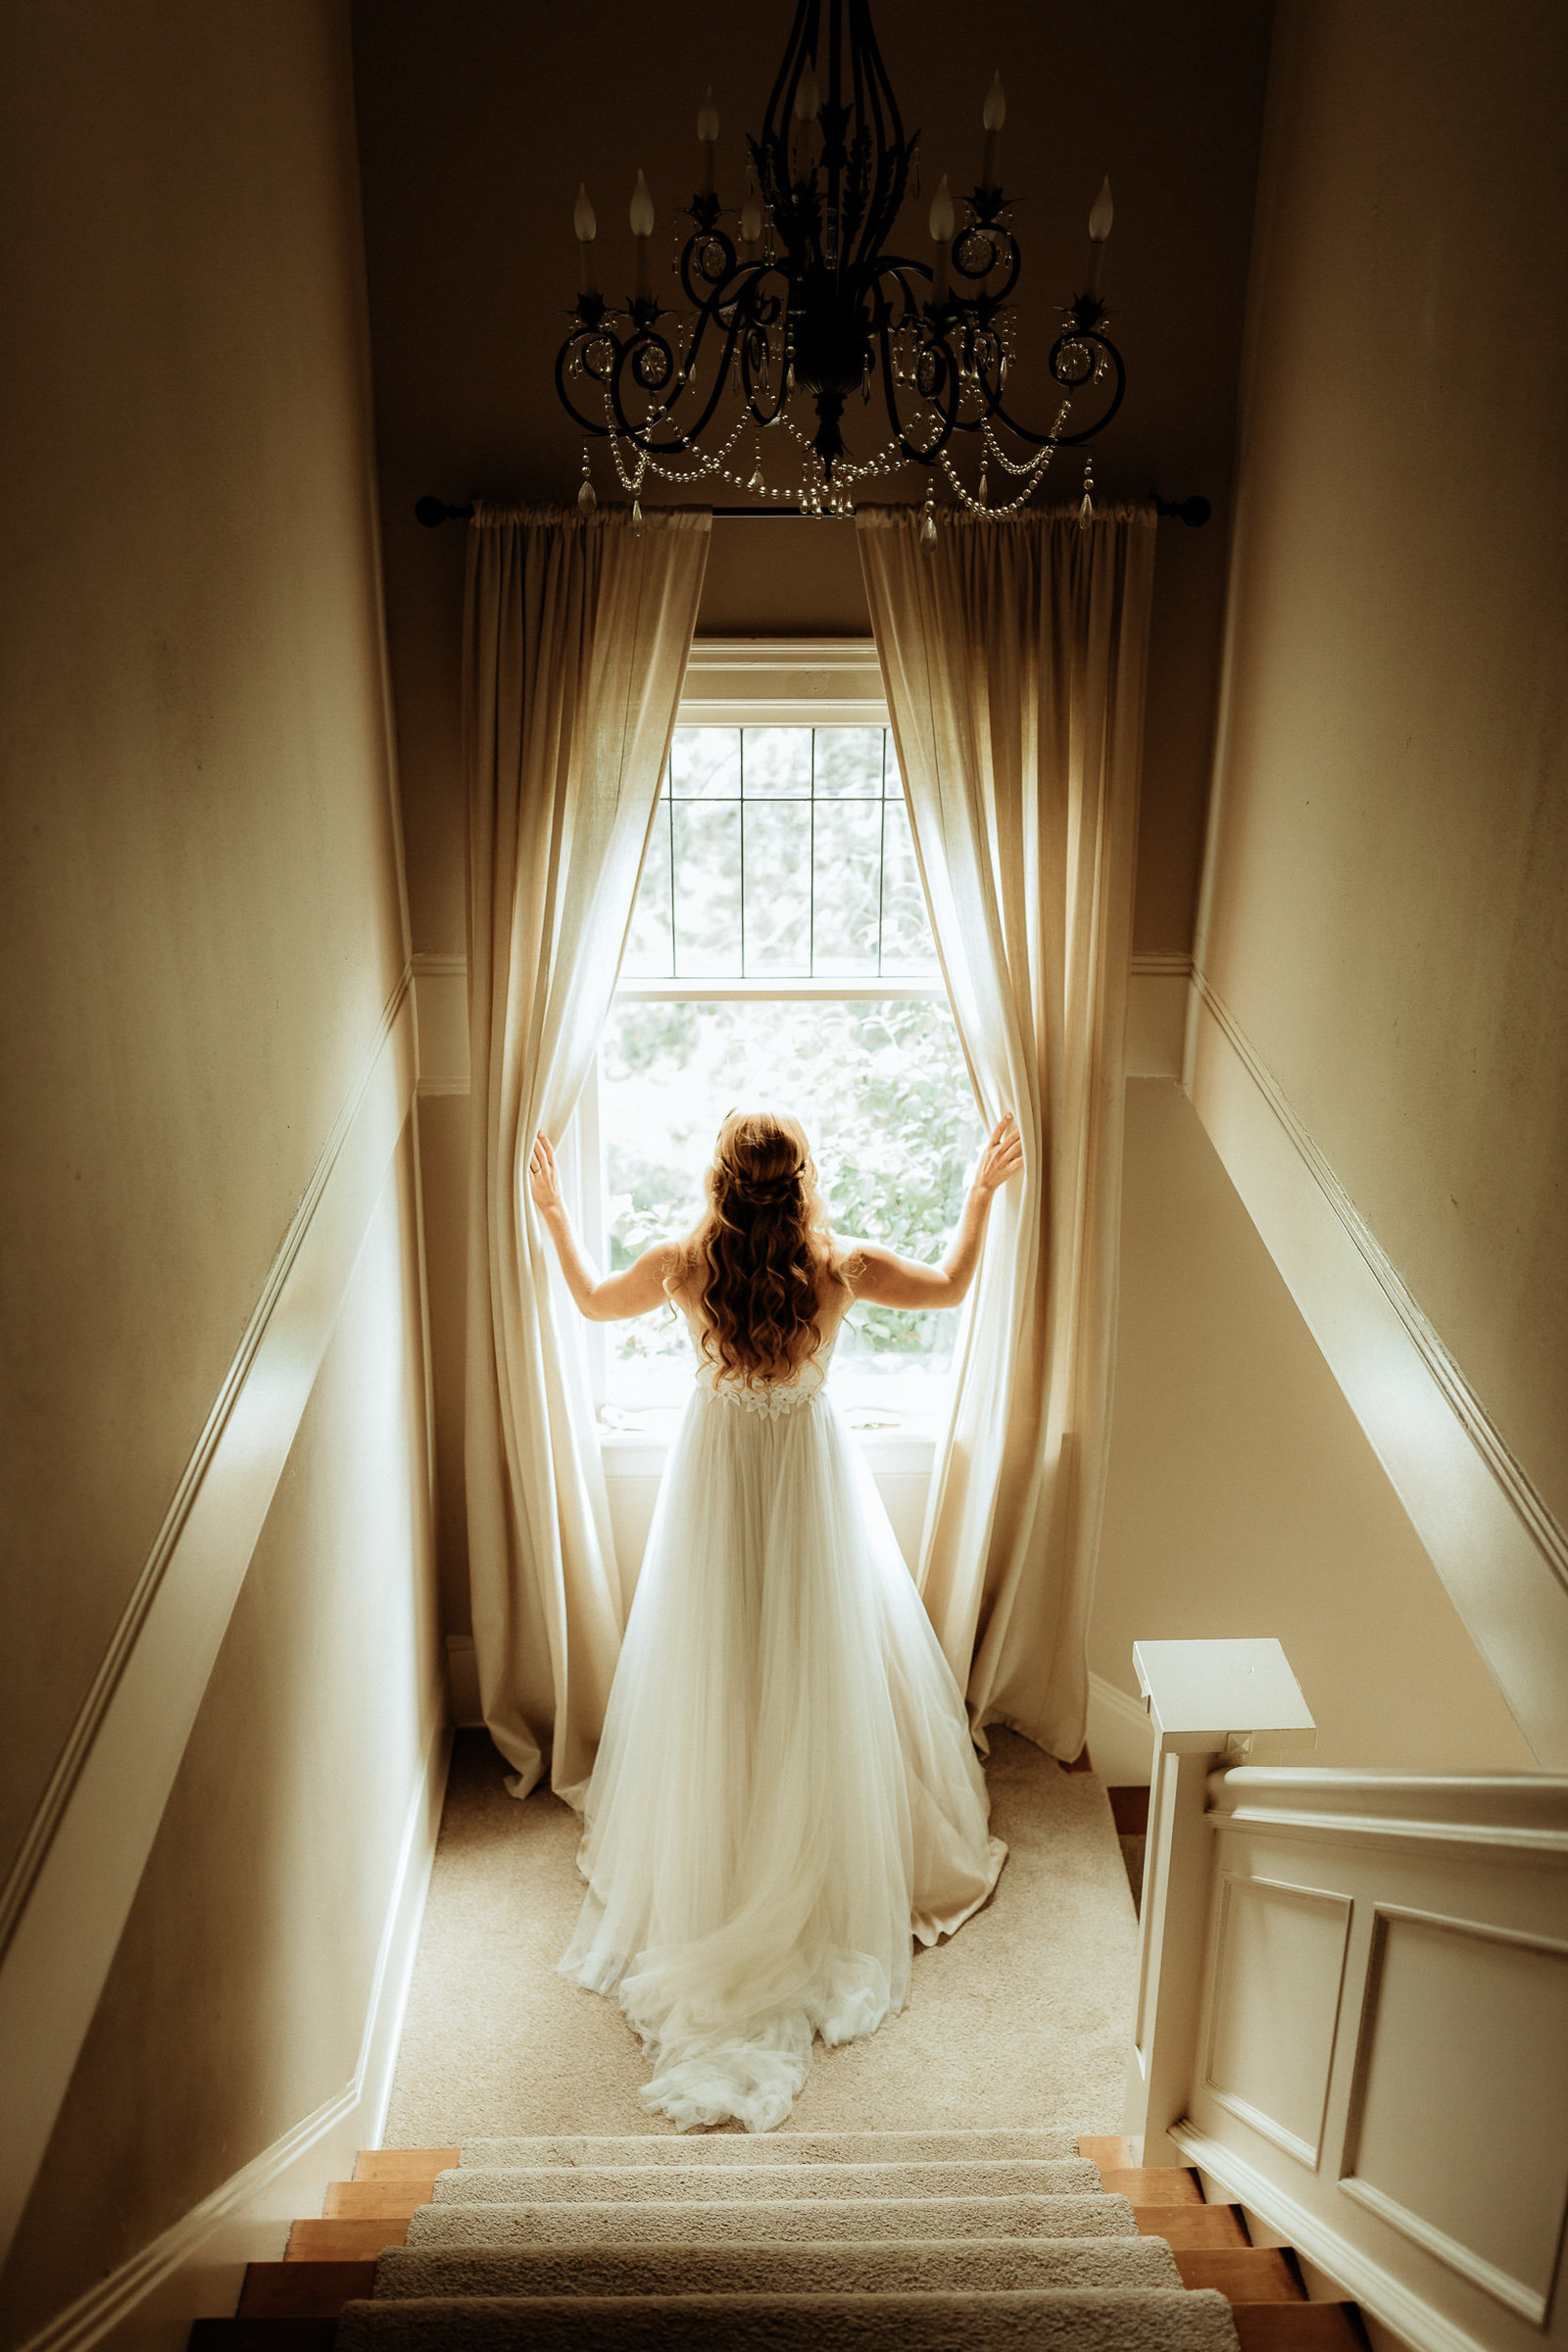 Bride standing in front of a window at the middle landing of a stairway